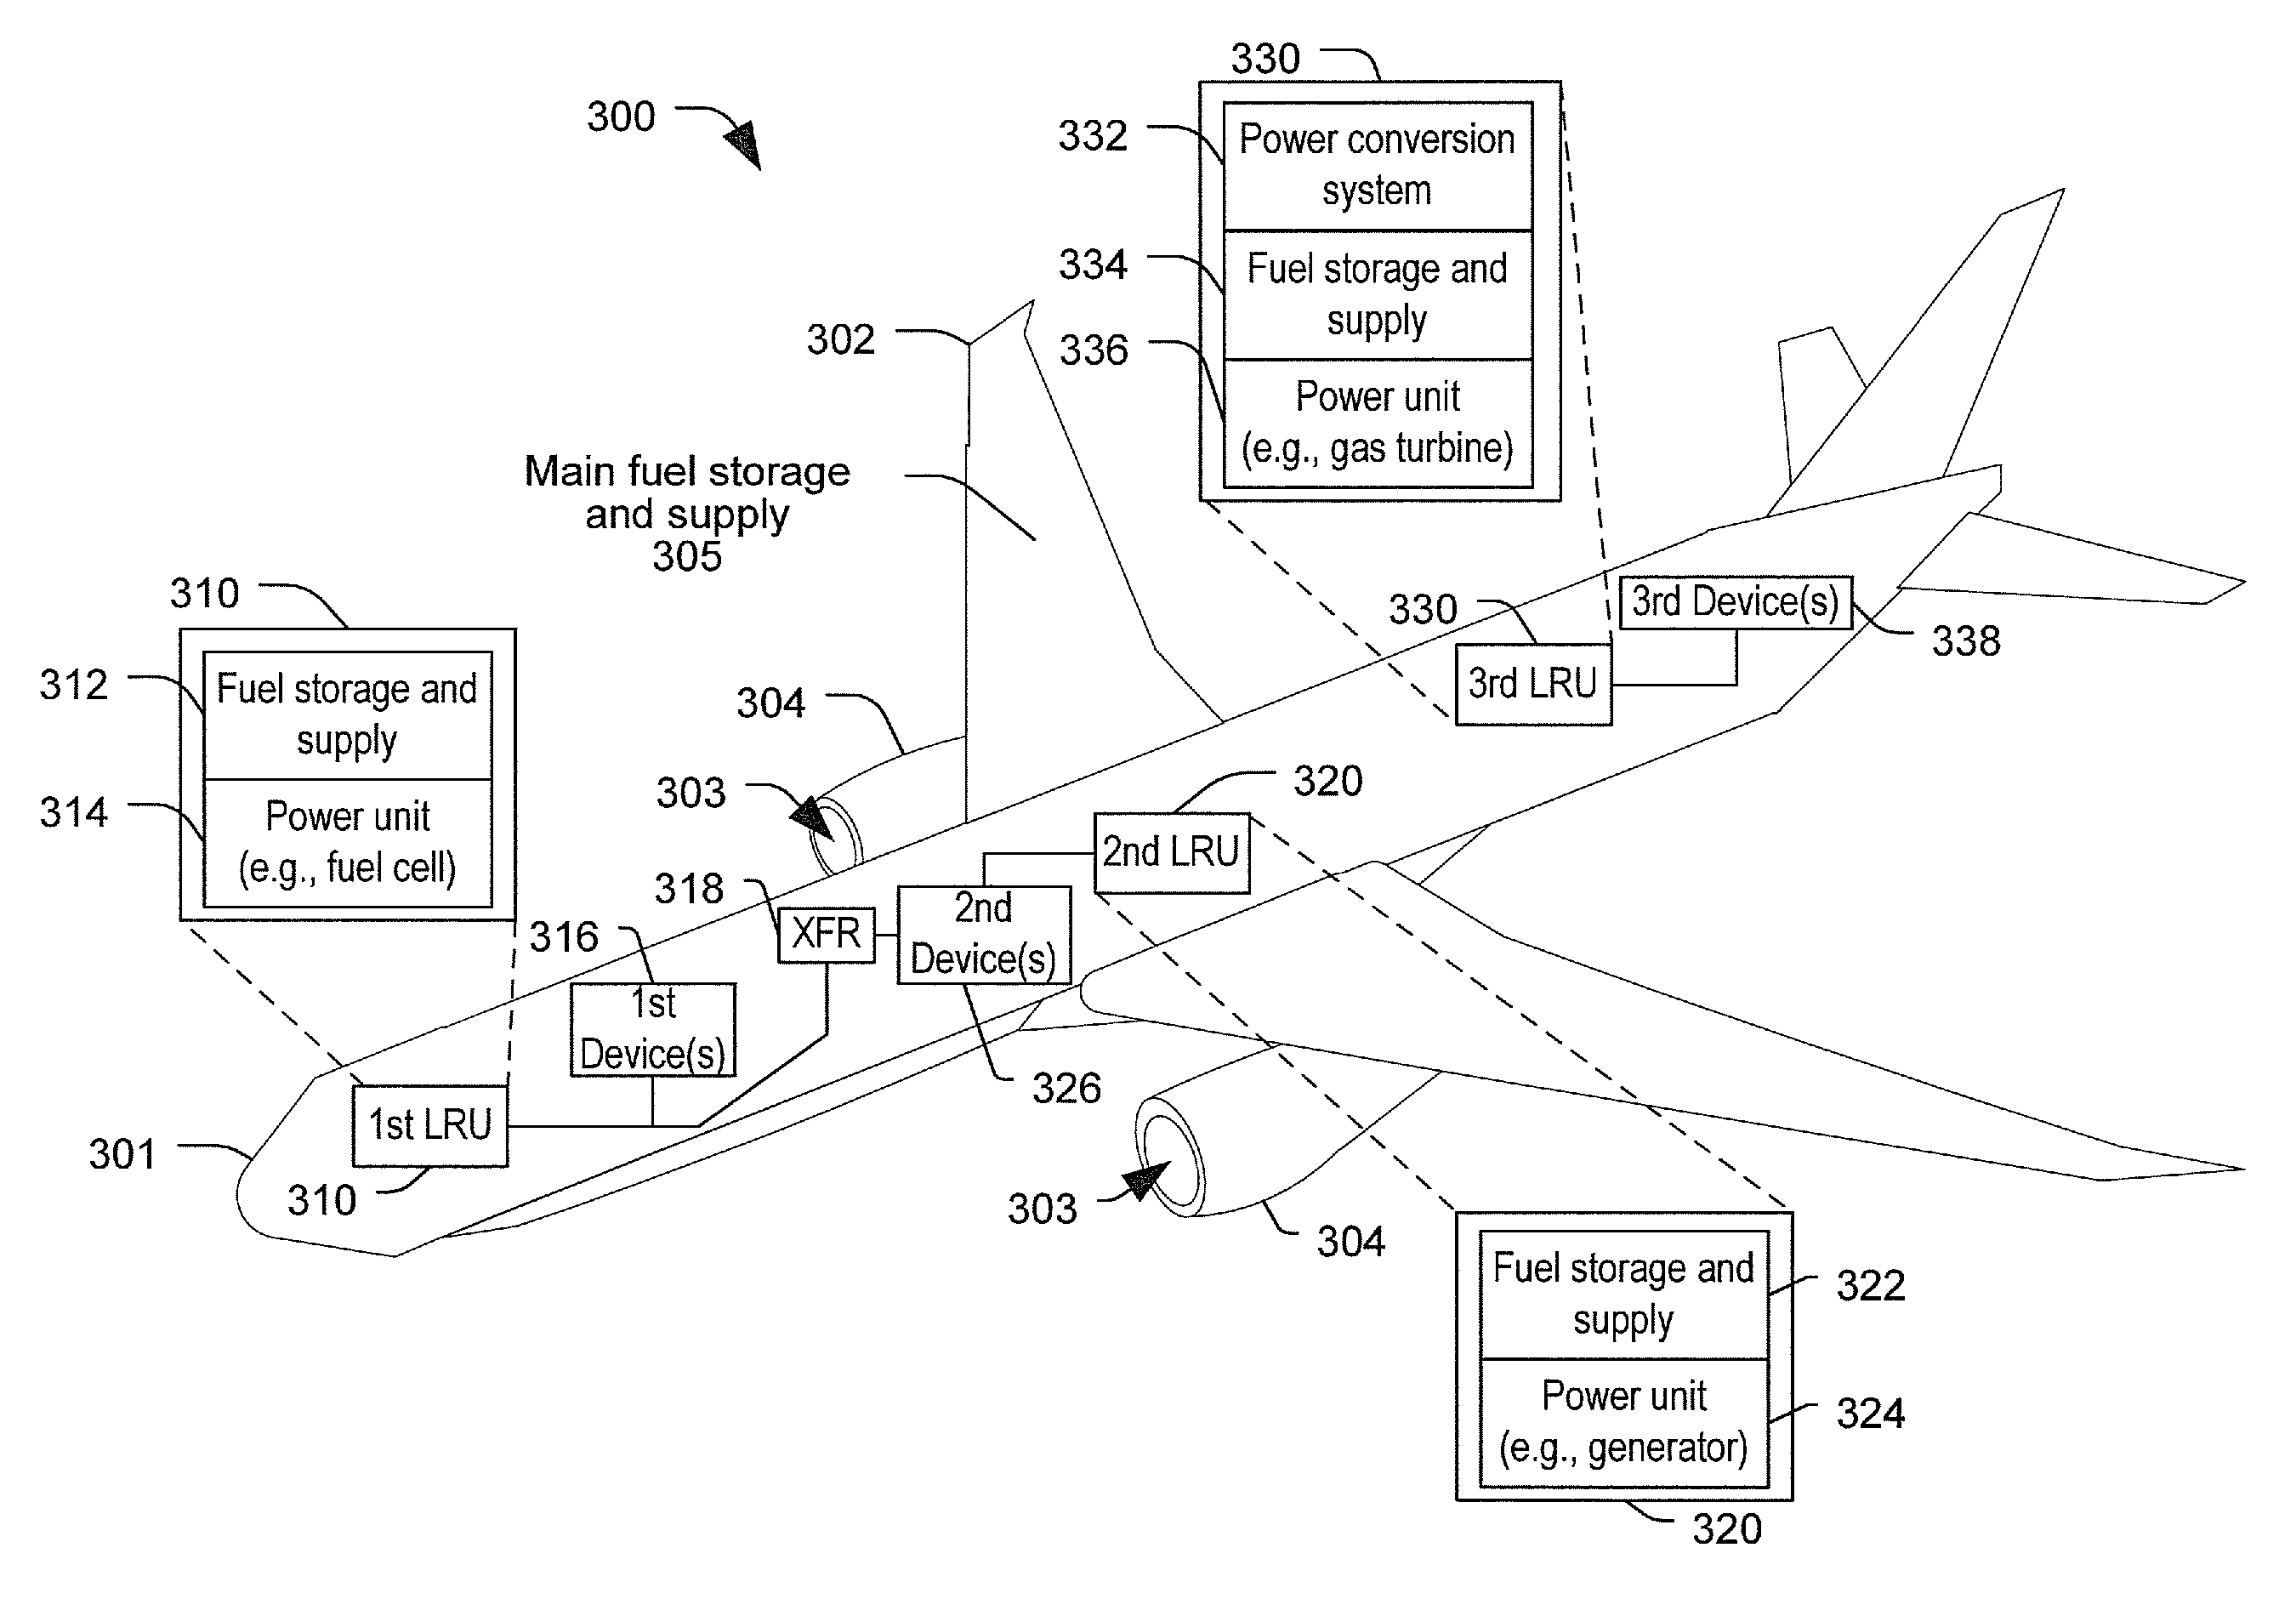 Independent power generation in aircraft